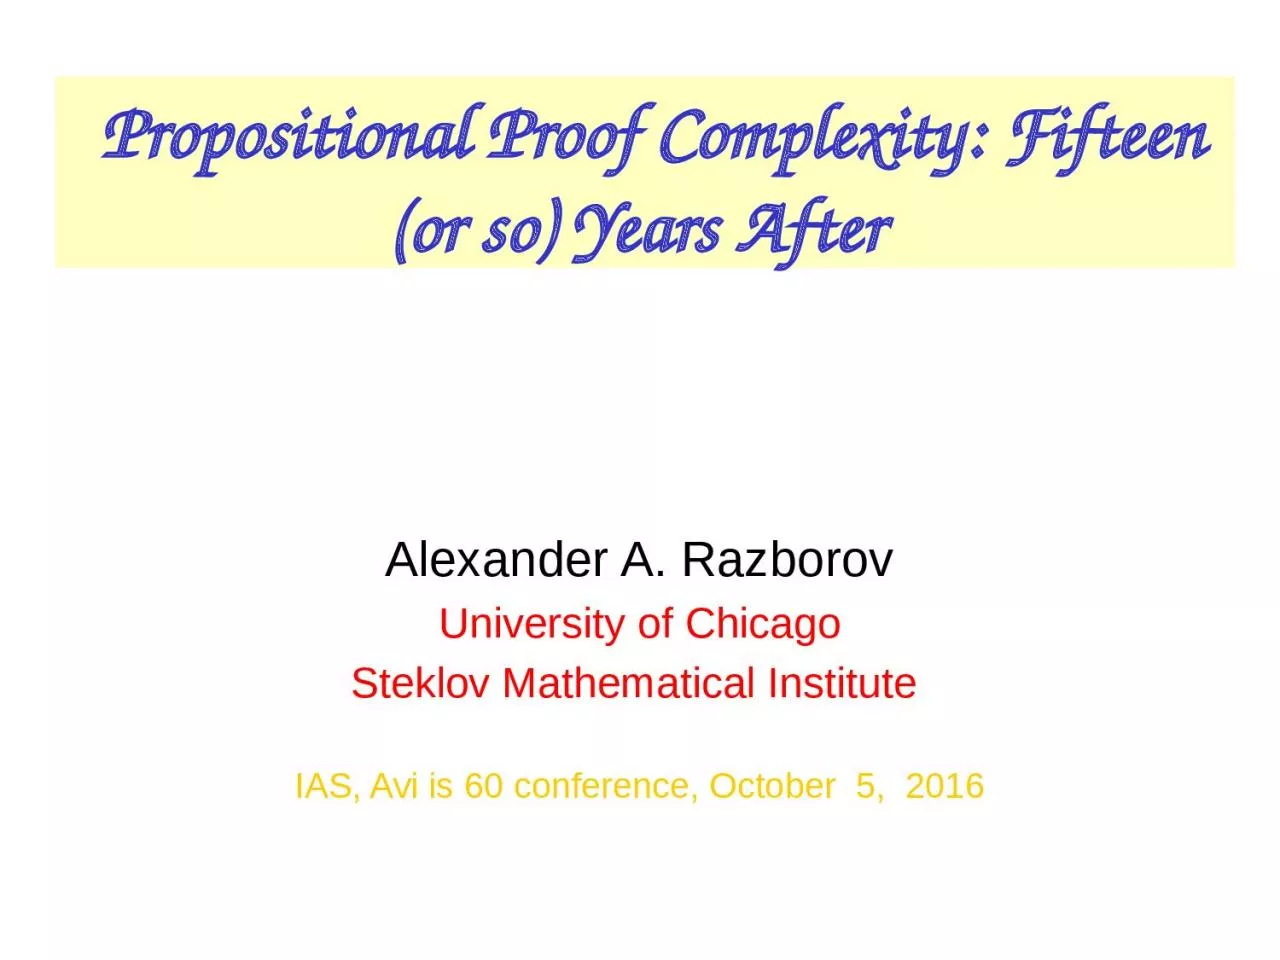 Propositional Proof Complexity: Fifteen (or so) Years After